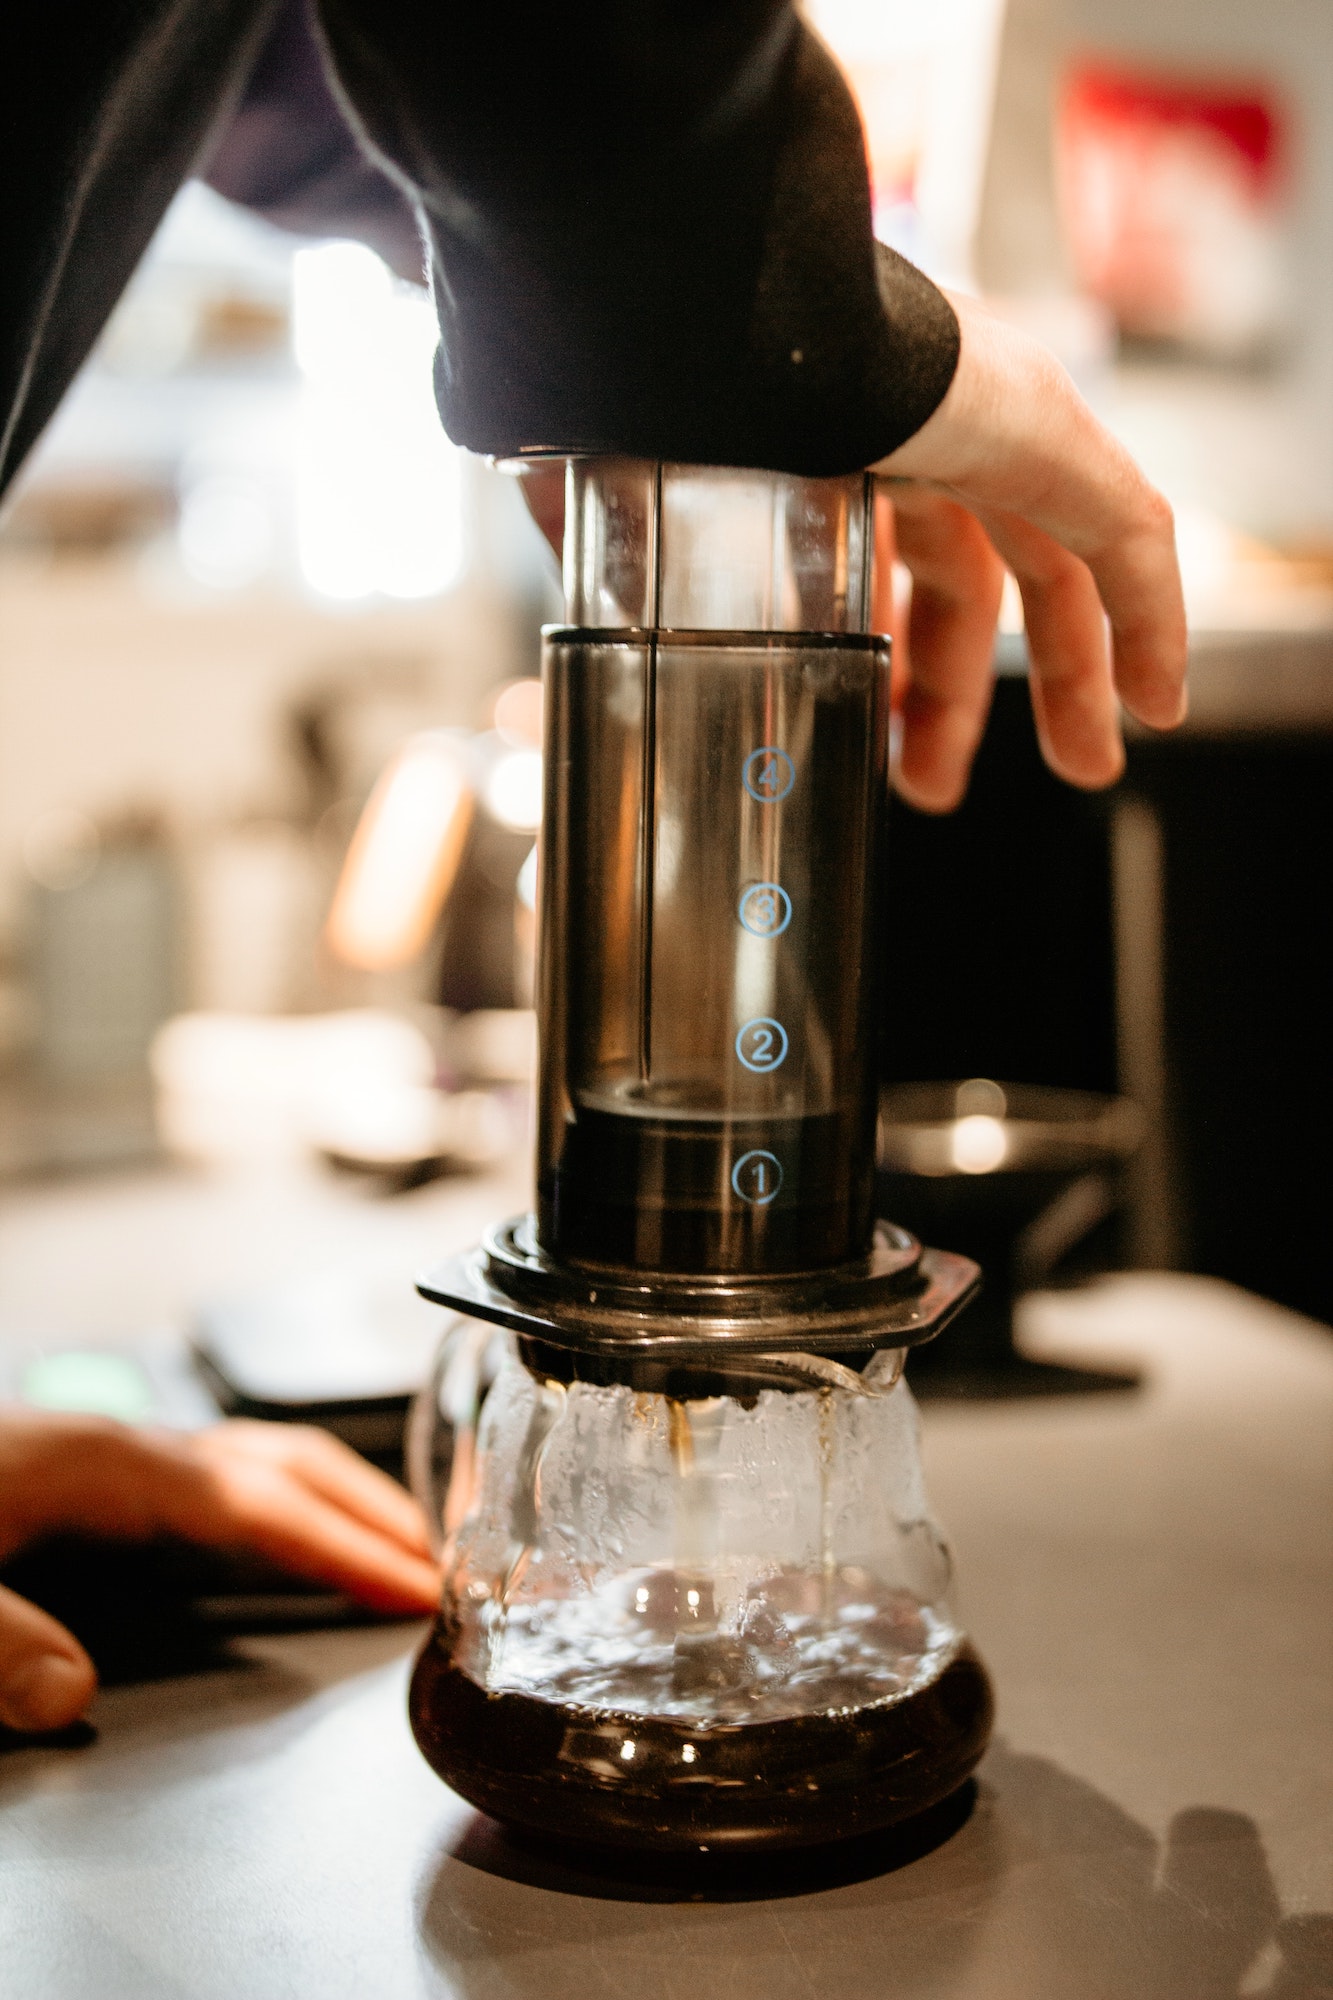 The AeroPress is very easy to use for anyone looking to get into home brewing